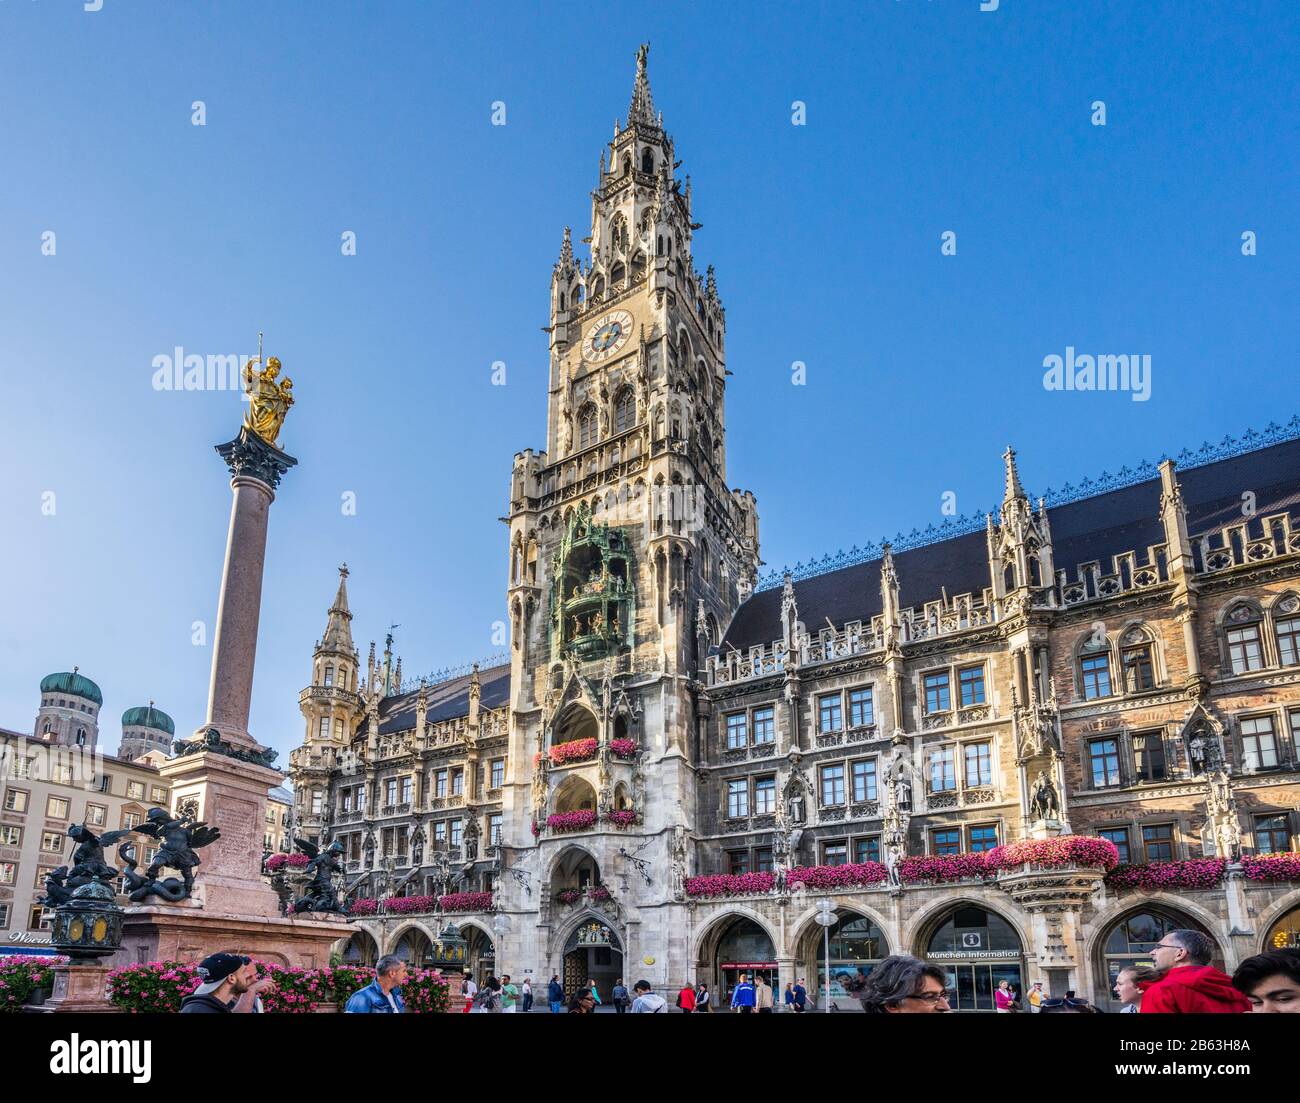 the richly decorated facade of the New Munich Town Hall (Neues Rathaus) with its 85 m high Rathausturm and Mariensäule column at Marienplatz, München- Stock Photo